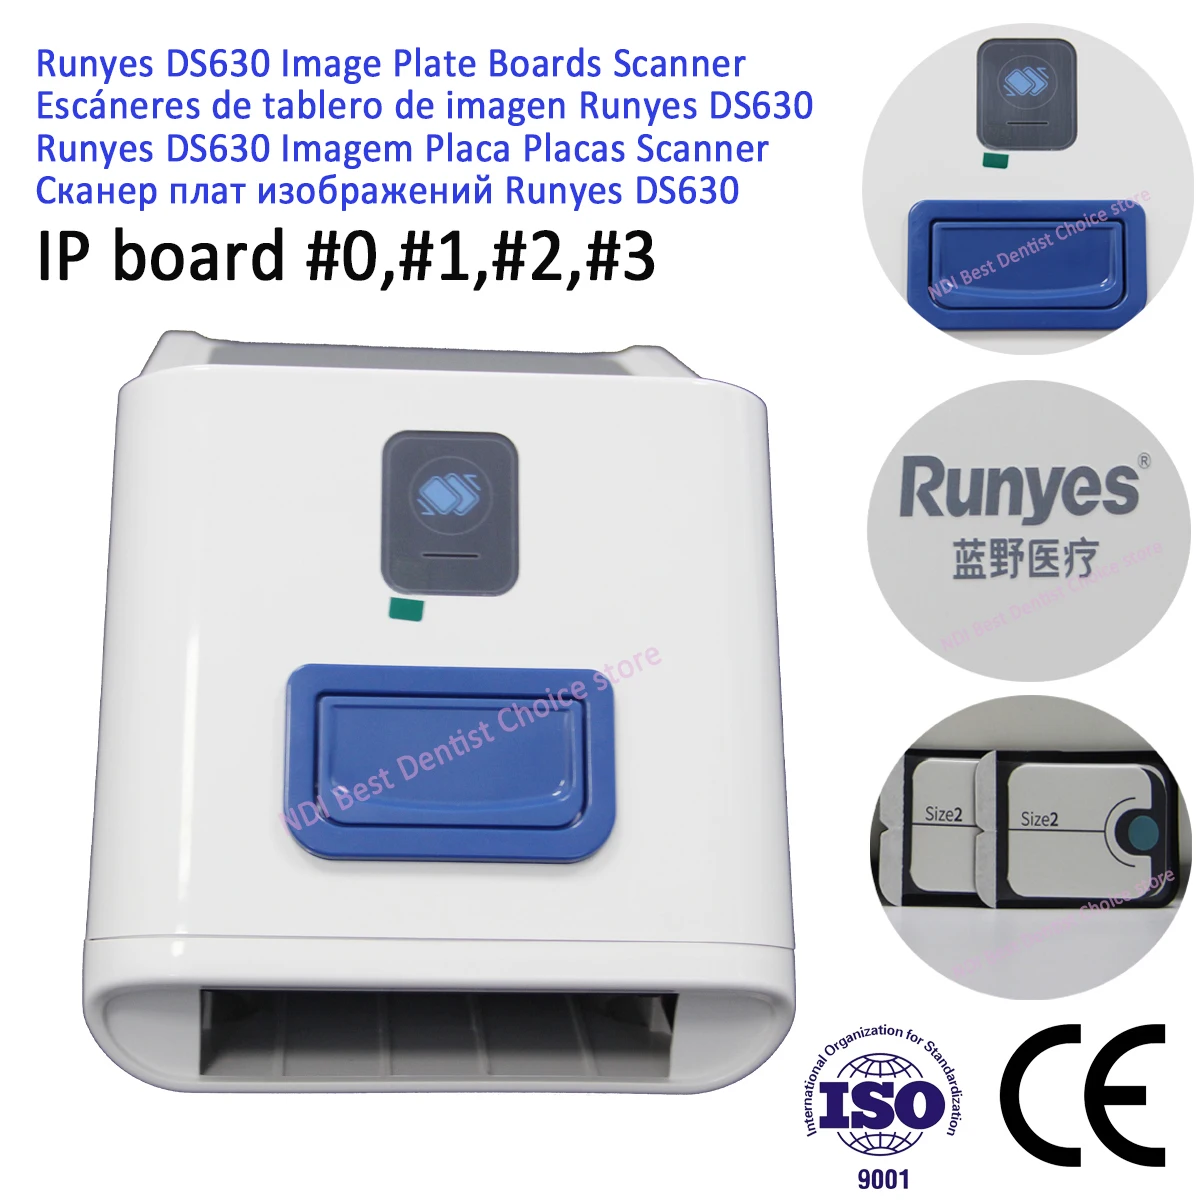 

CE Approved Runyes DS630 Dental Digital Intraoral Imaging Boards X-ray Plates Scanner with 2 Years Guarantee for Imaging Plates